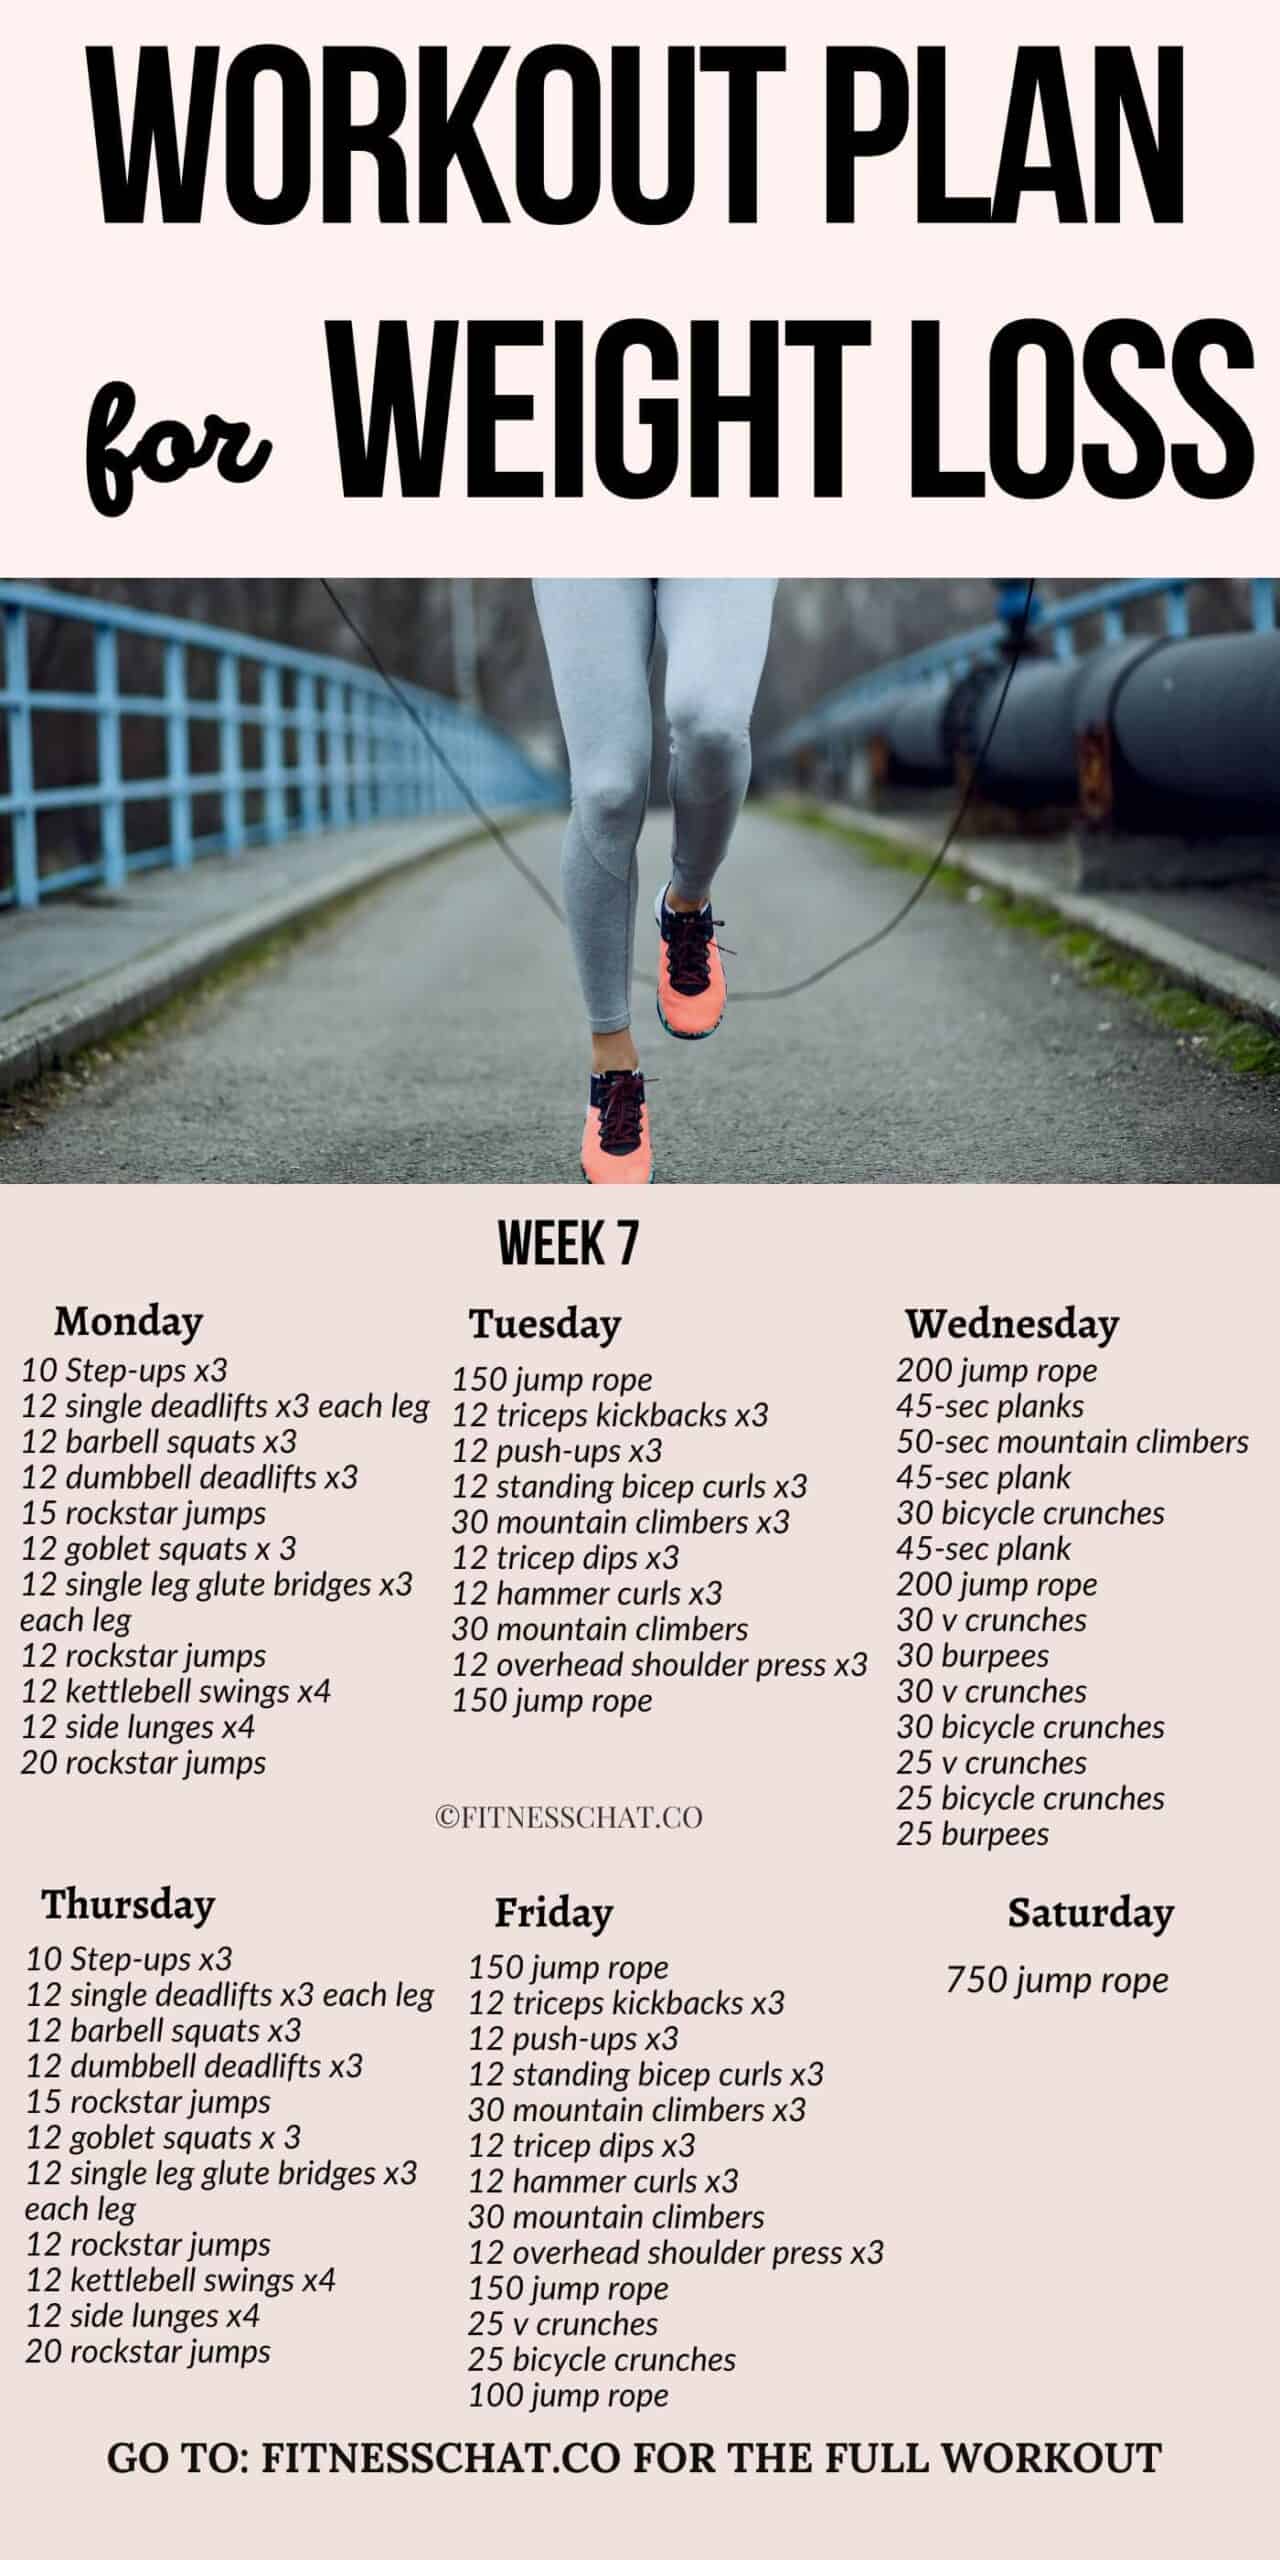 Workout plan for weight loss female week 1